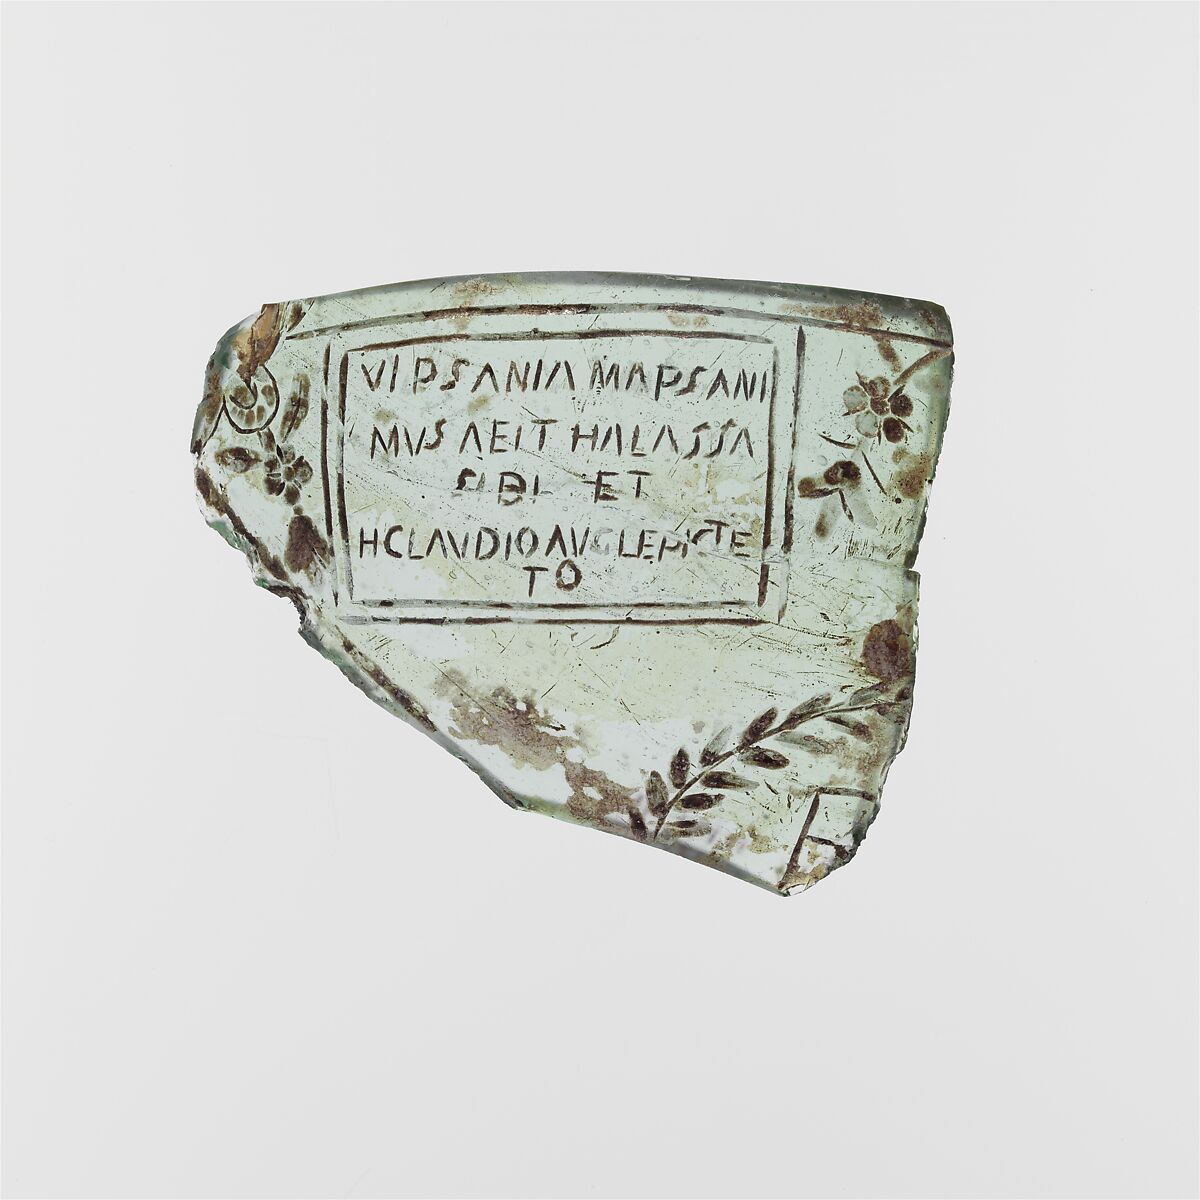 Glass bowl fragment with later inscription, Glass, Roman